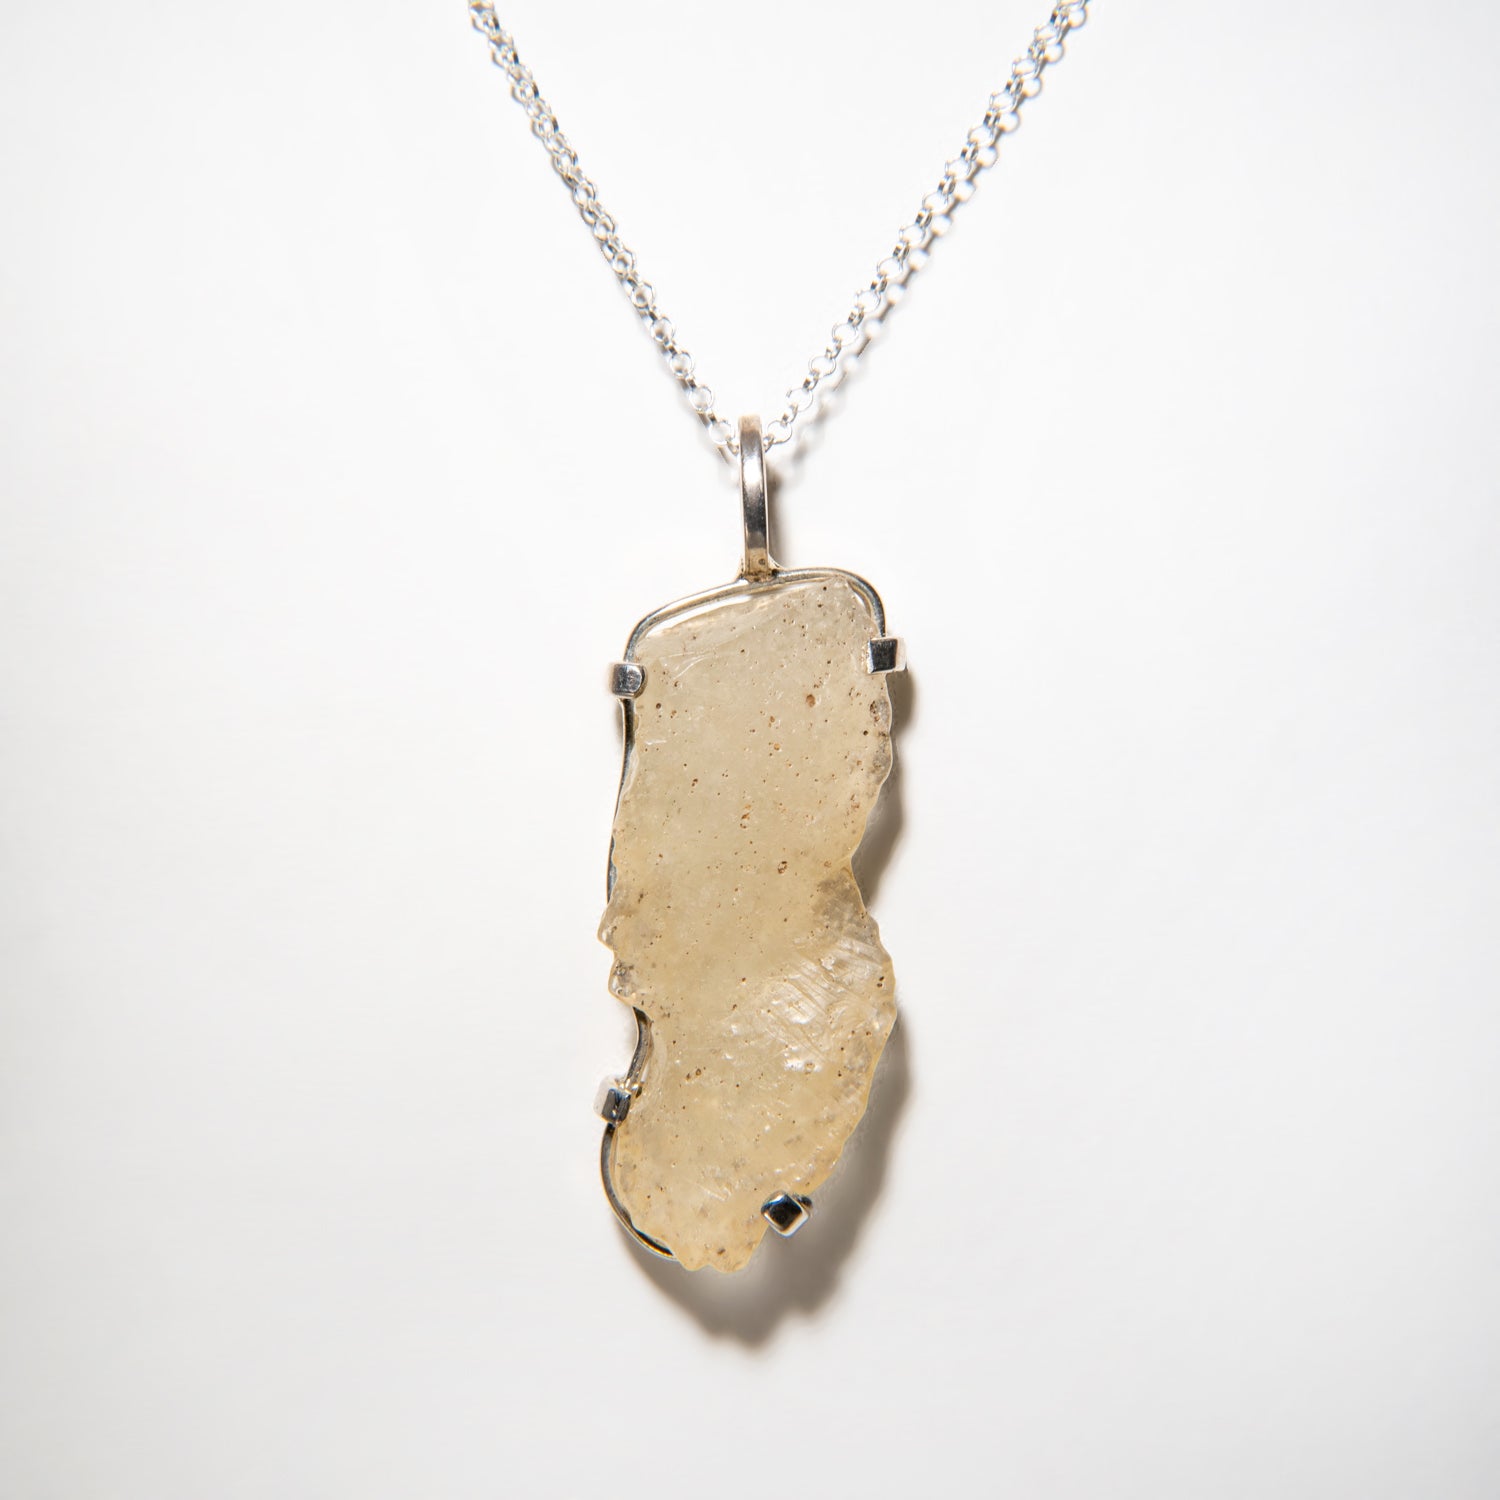 Genuine Libyan Desert Glass Pendant (10.4 grams) with 18" Sterling Silver Chain